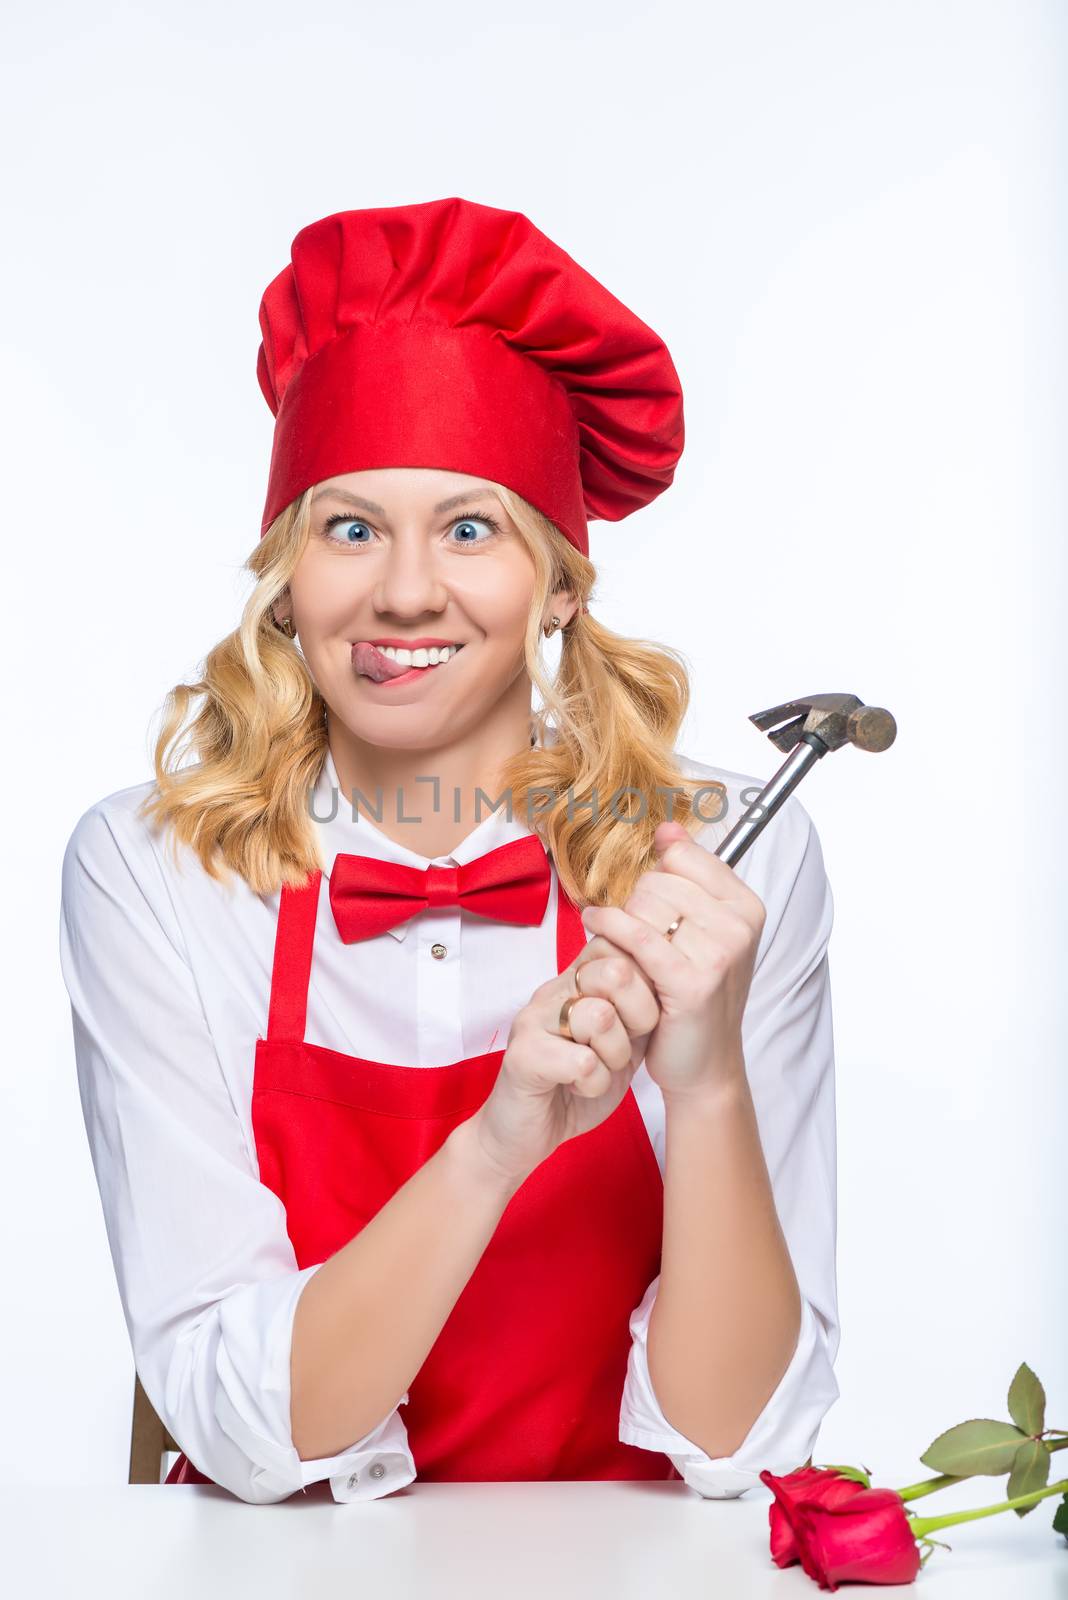 Crazy woman cook with hammer on white background isolated portra by kosmsos111